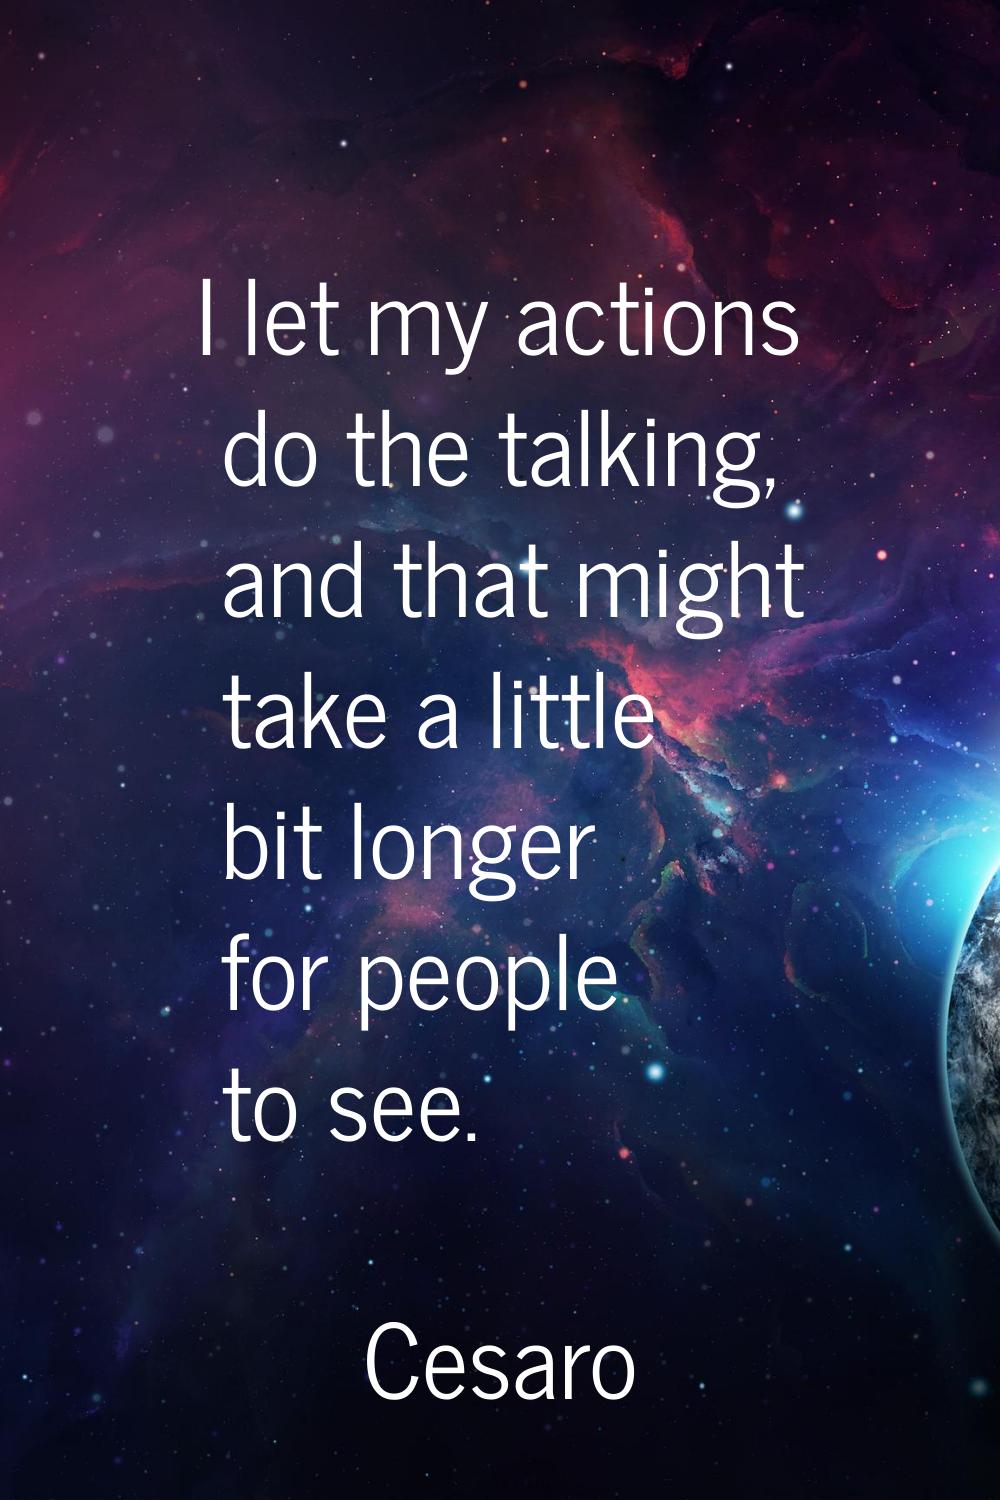 I let my actions do the talking, and that might take a little bit longer for people to see.